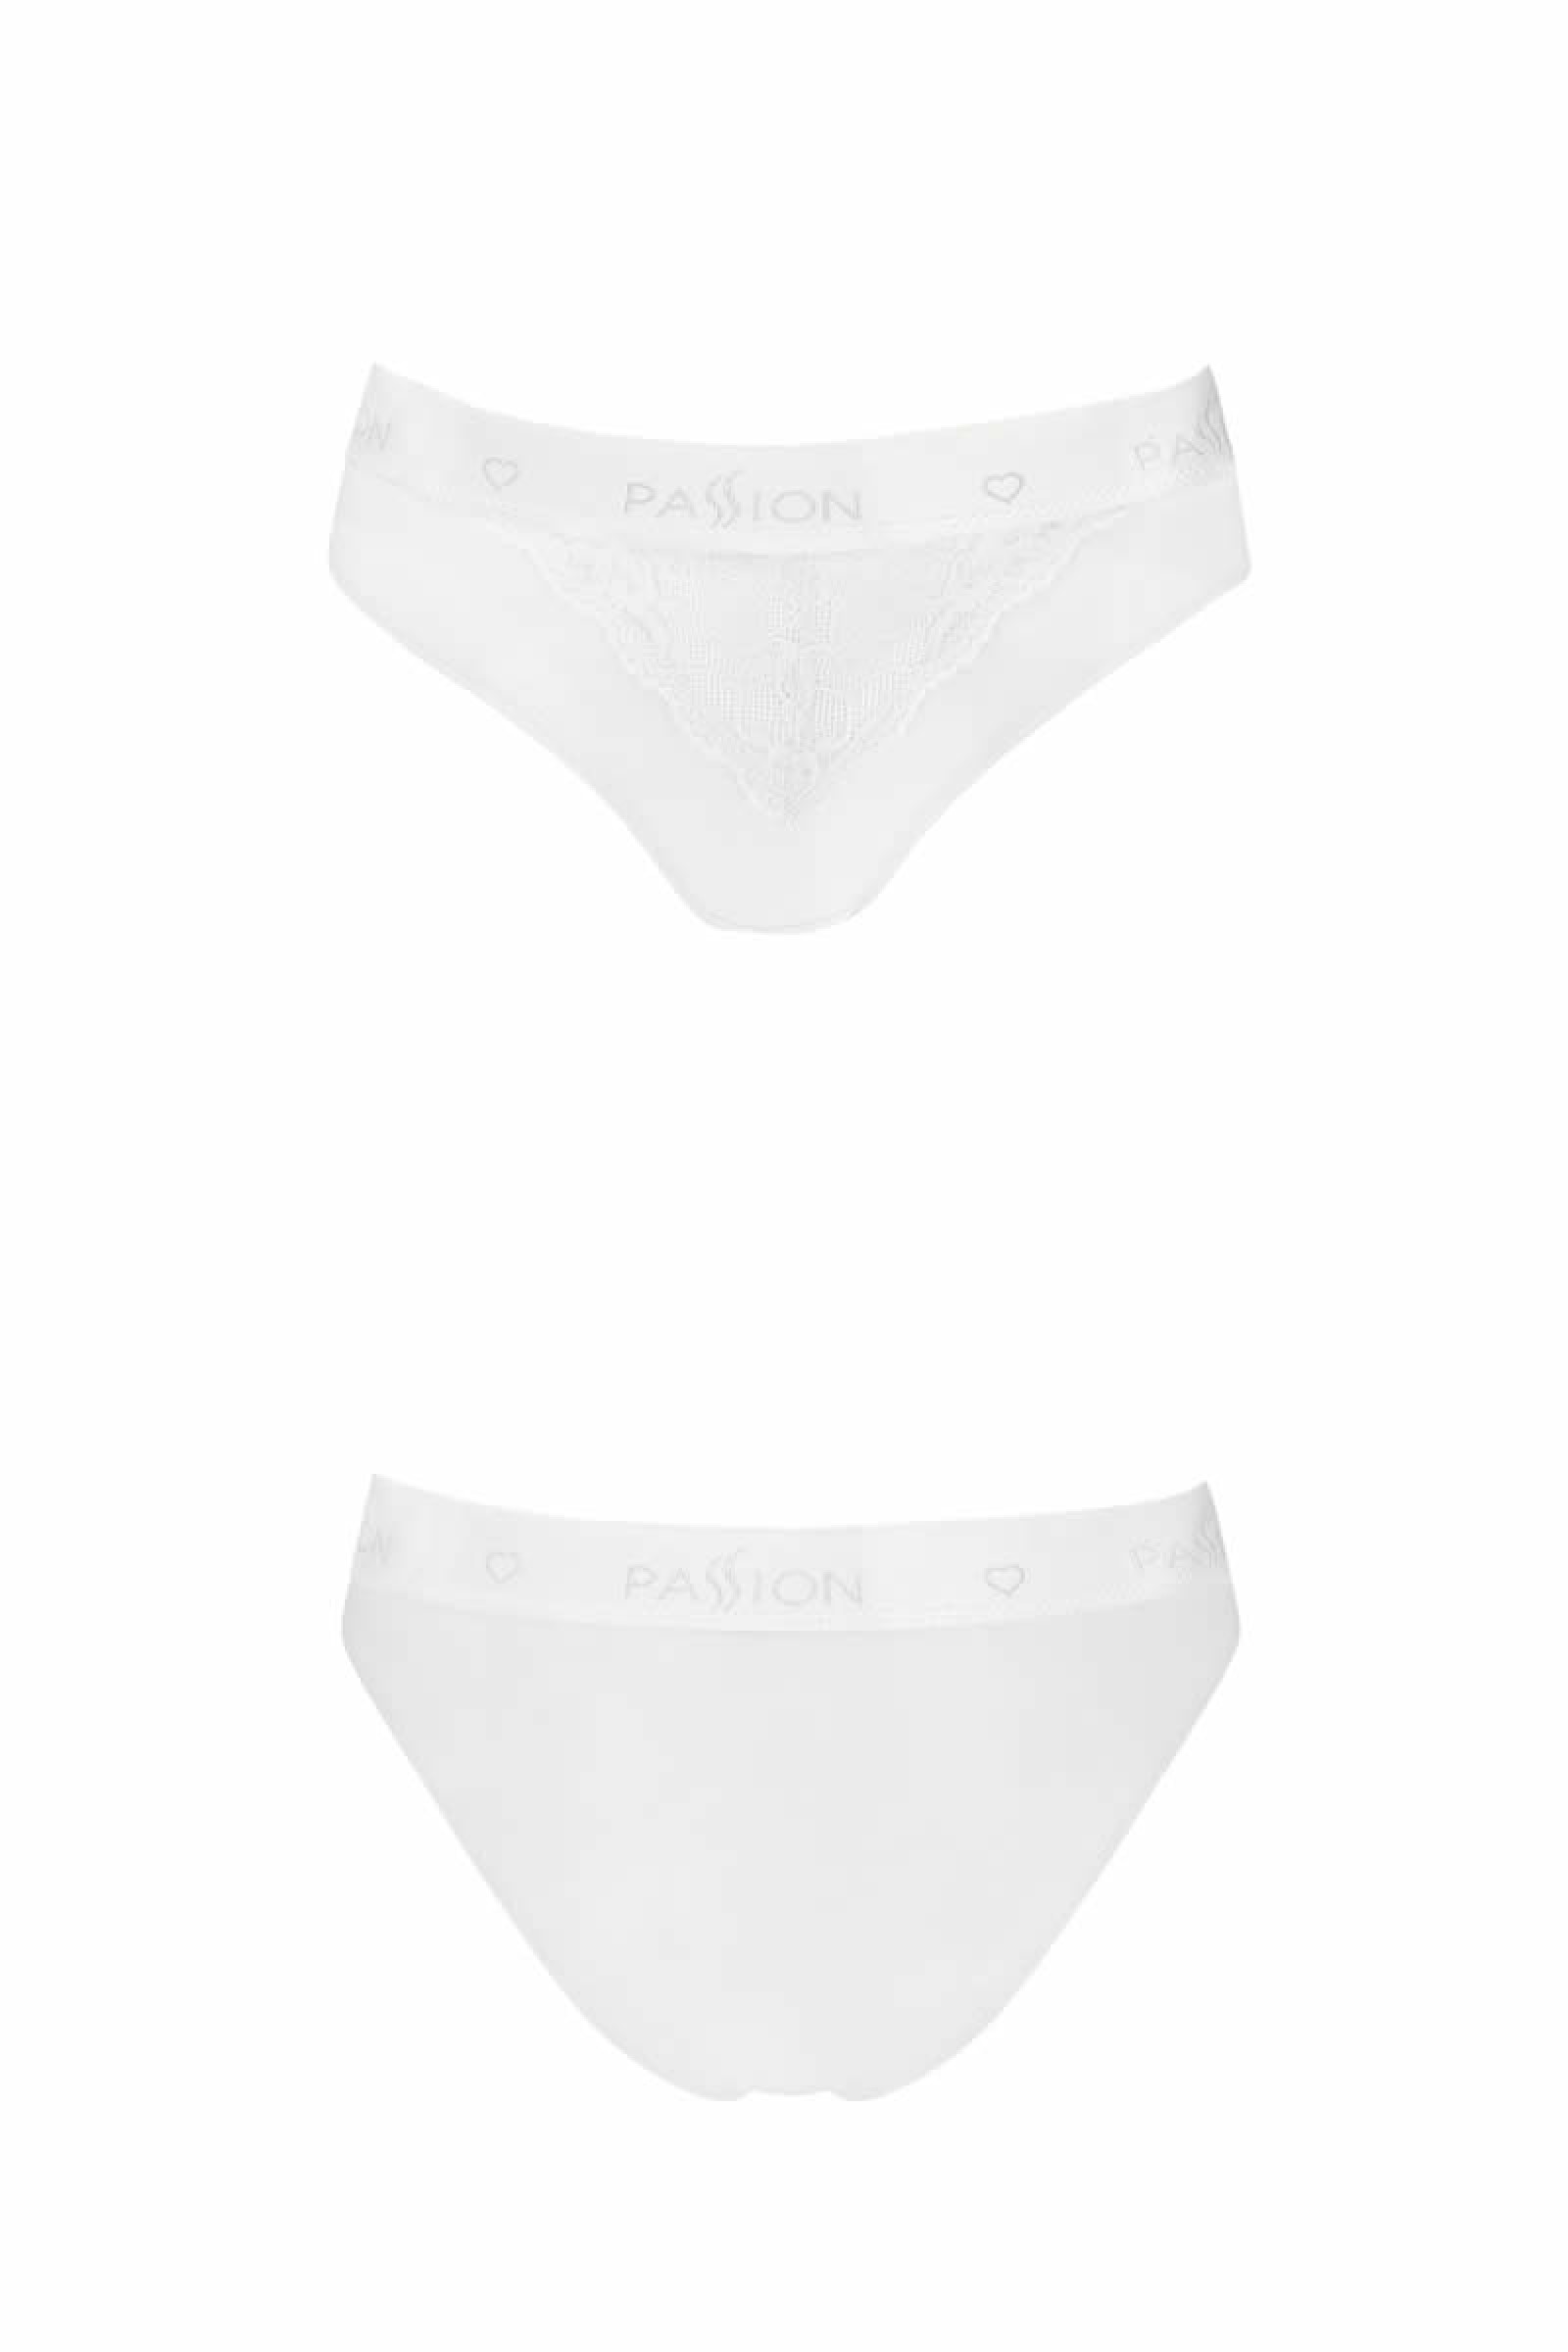 PS001 pantie white Βαμβακερό κιλοτάκι με δαντέλα απο την Passion!.